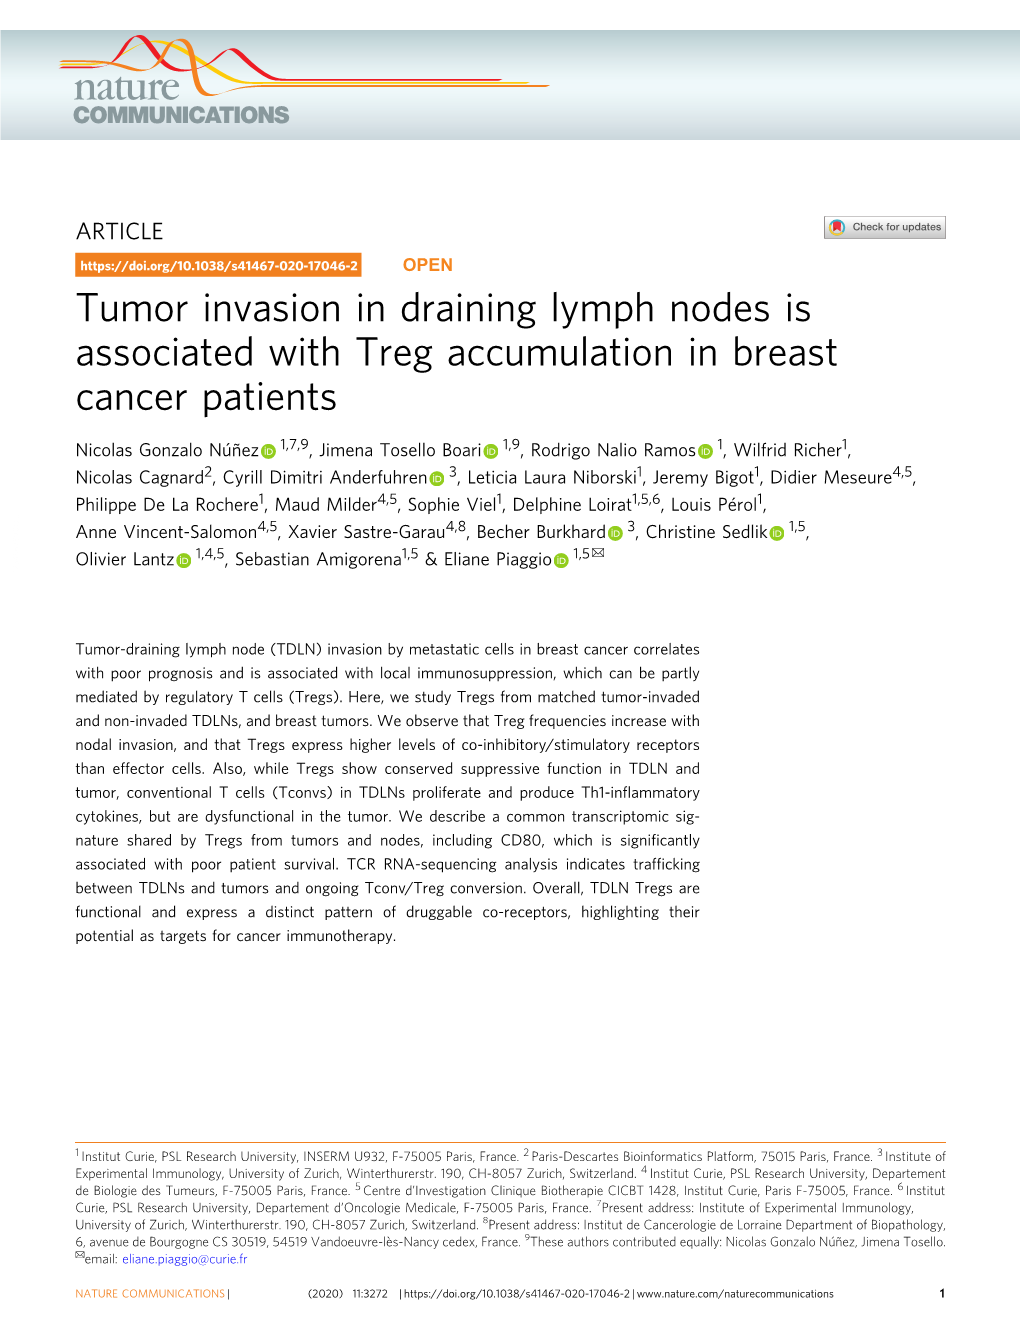 Tumor Invasion in Draining Lymph Nodes Is Associated with Treg Accumulation in Breast Cancer Patients